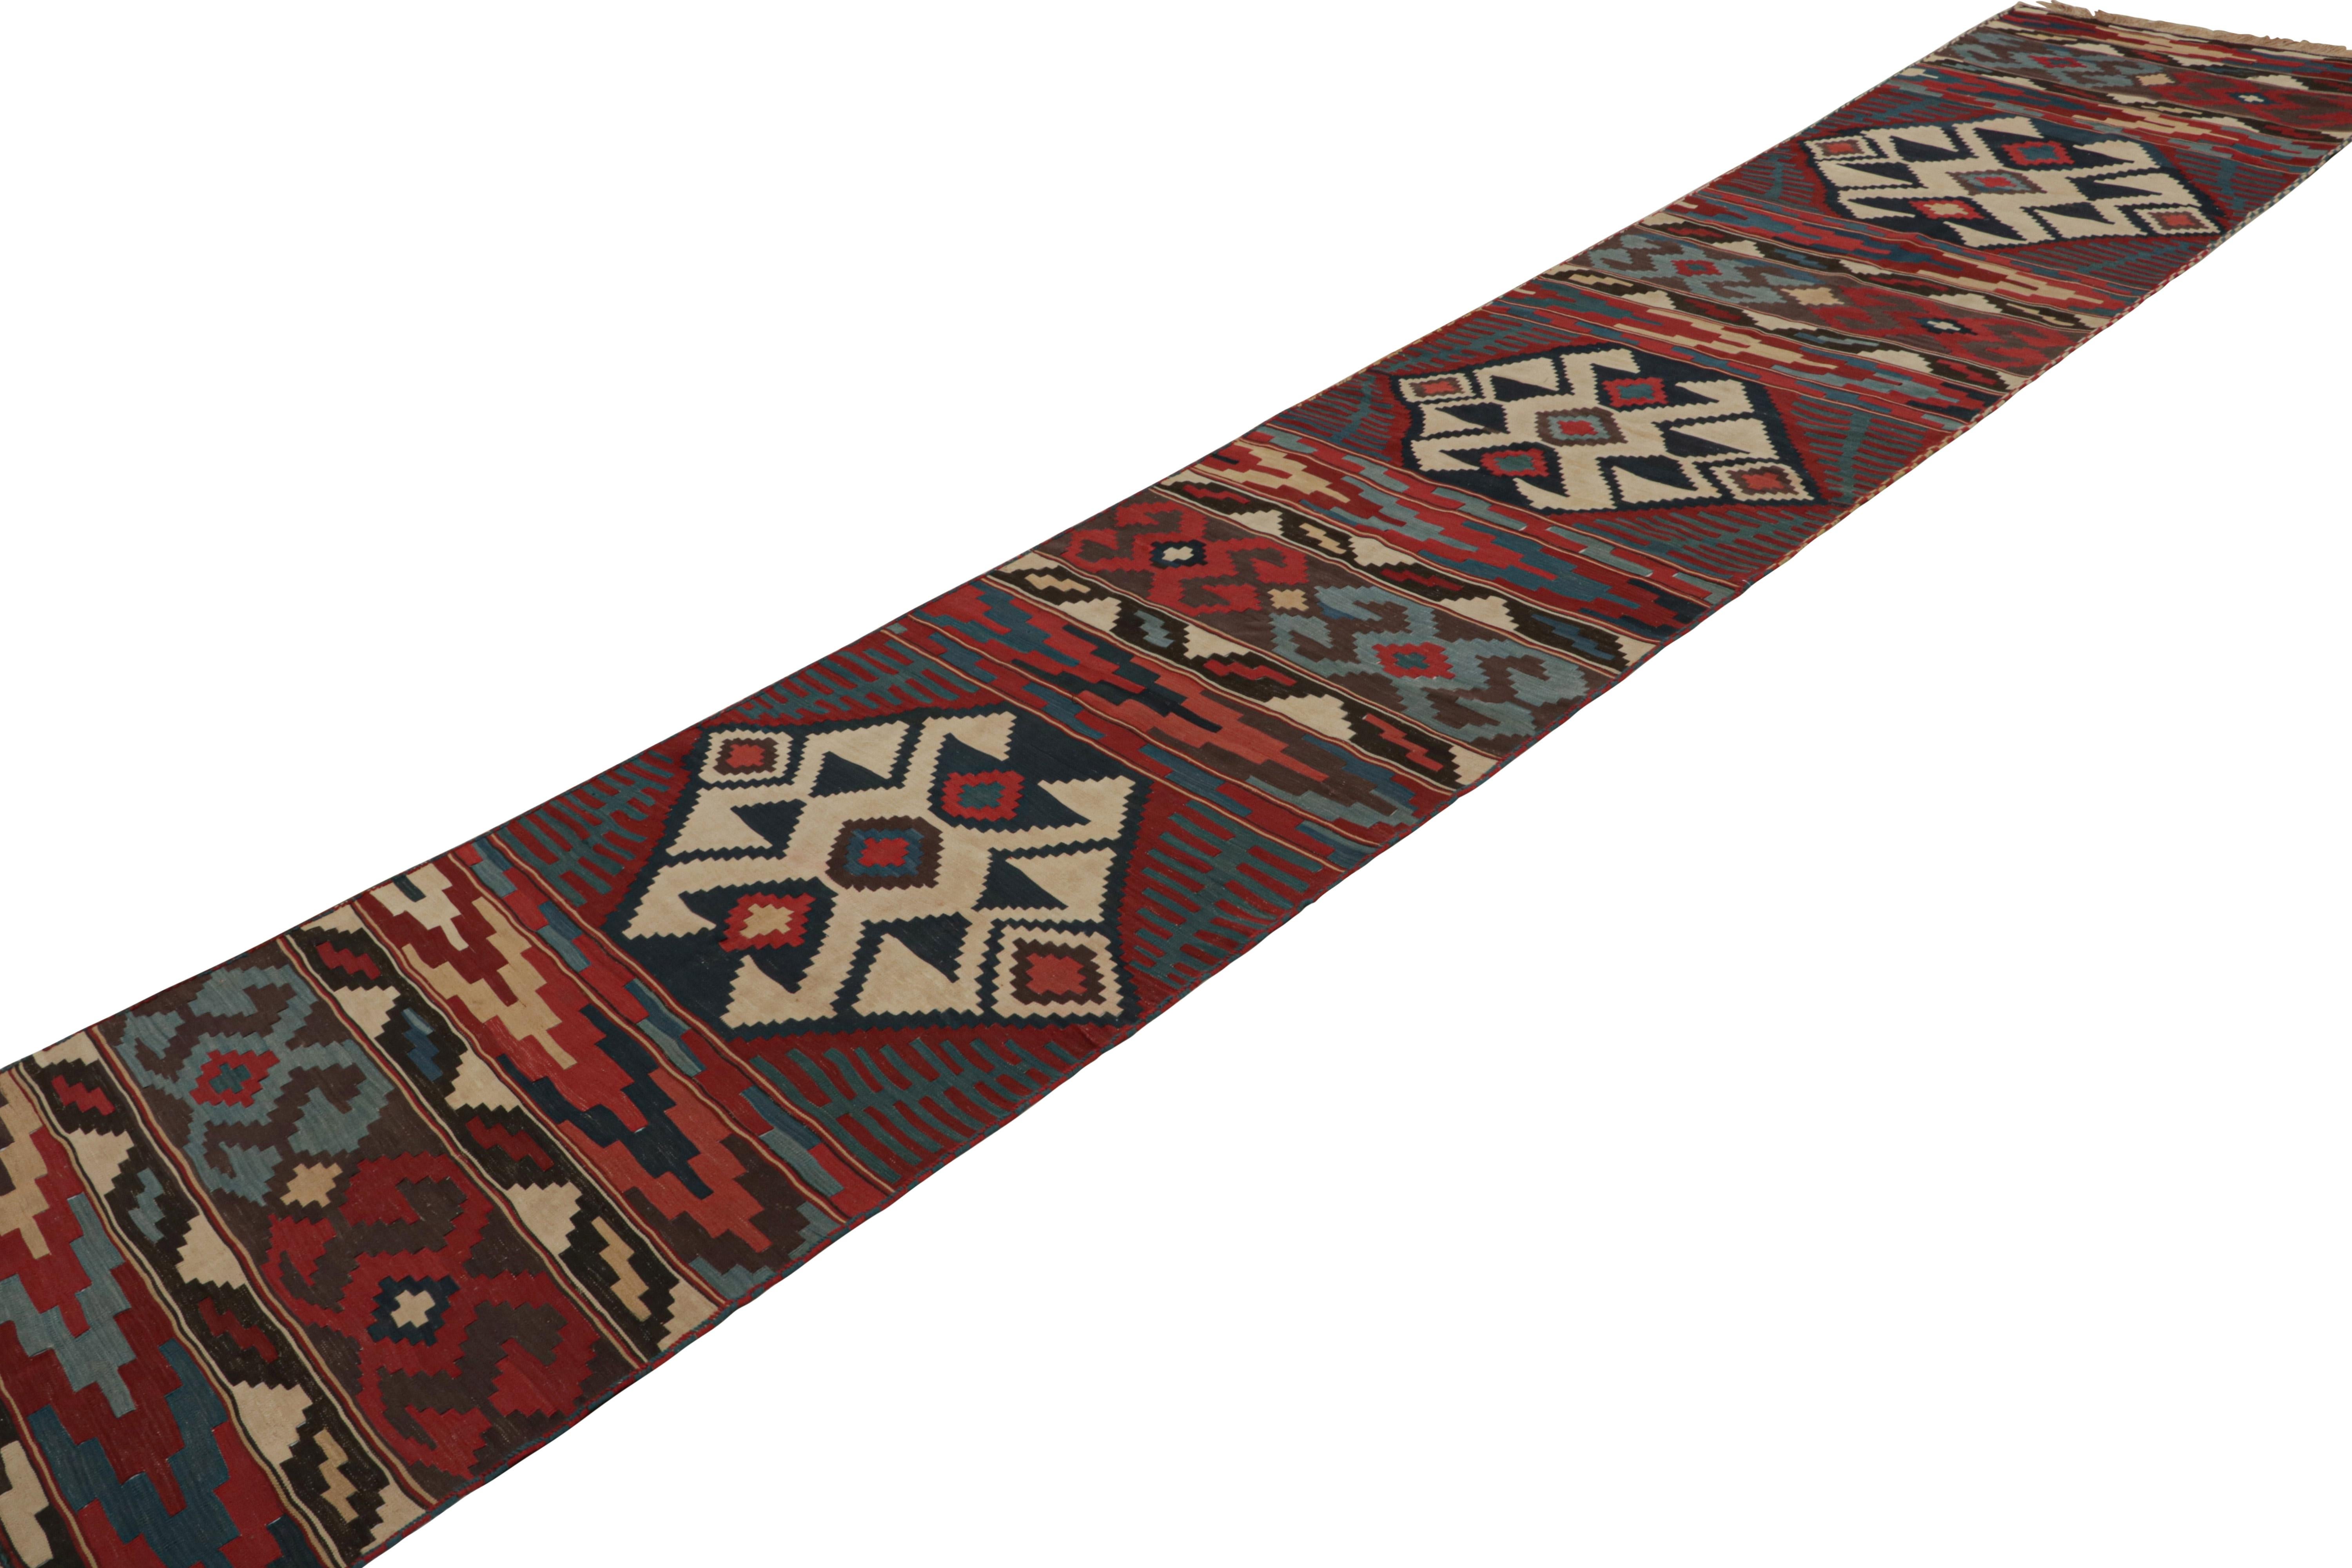 These flatweaves are a pair of twin 3x17 vintage Persian Kilim runner rugs, handwoven in wool circa 1950-1960. These tribal runners are nearly identical in size and design, with geometric patterns in red, blue and beige tones. 

On the Design: 